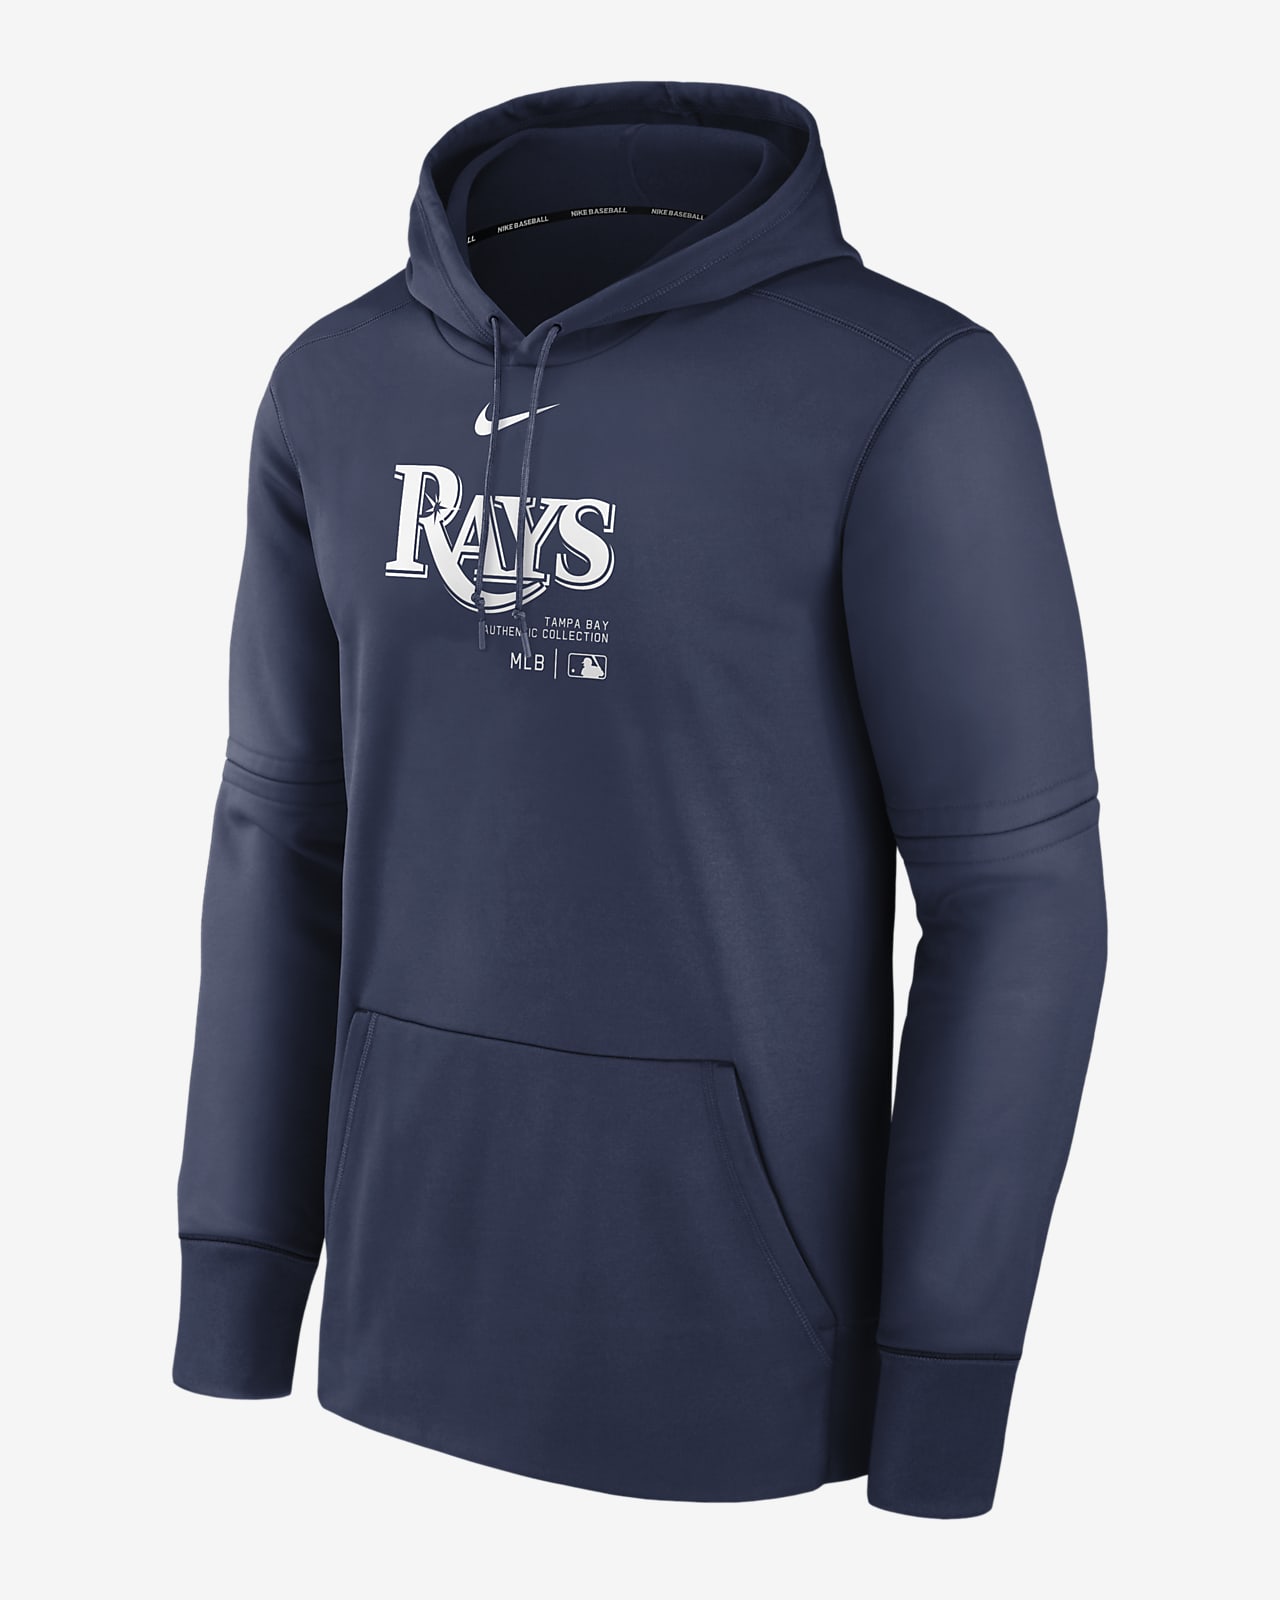 47 Tampa Bay Rays Vintage Trifecta Shortstop Pullover Hoodie